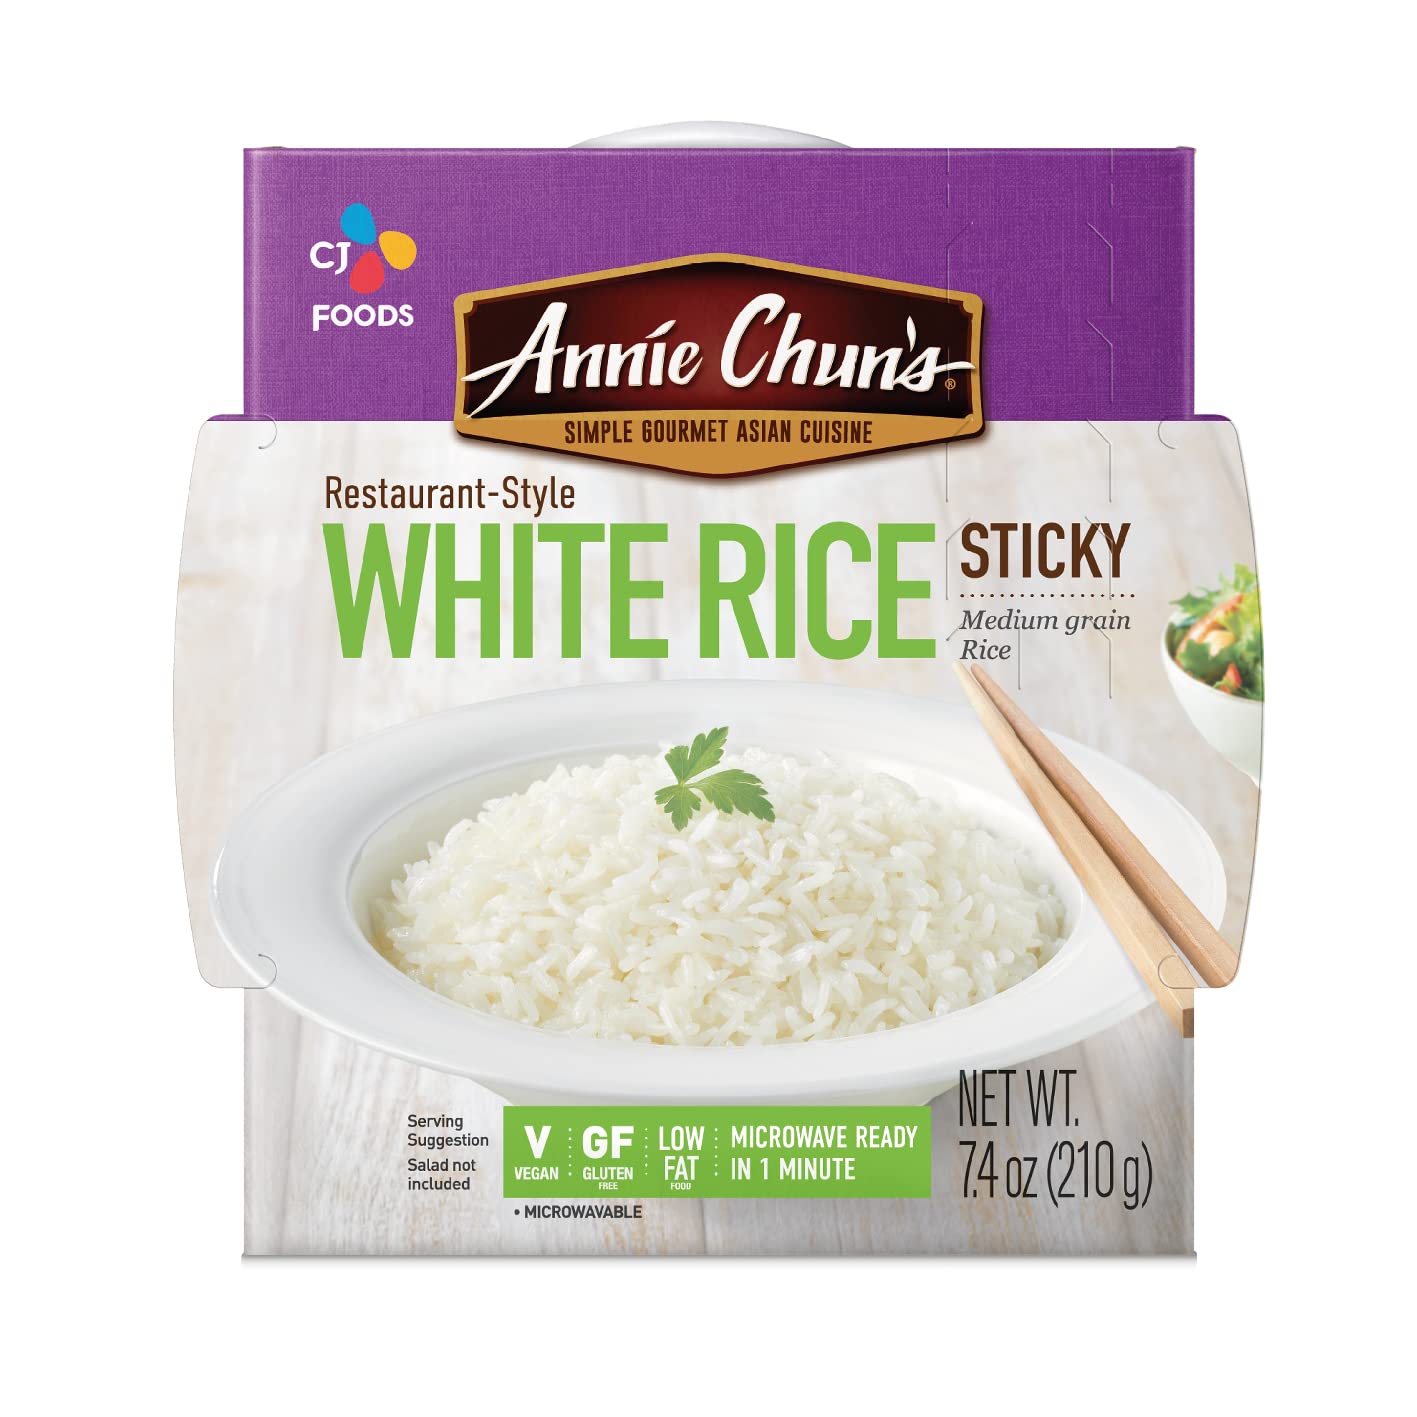 In the pursuit of a convenient yet satisfying meal option, I recently tried Annie Chun's Cooked White Sticky Rice. This review aims to provide an unbiased and comprehensive perspective on this instant, microwaveable rice option that boasts being gluten-free, vegan, low fat, and delicious.Taste and Texture:Annie Chun's Cooked White Sticky Rice offers a delightful taste and texture, reminiscent of freshly cooked sticky rice. The rice grains maintain their stickiness and softness after microwaving,